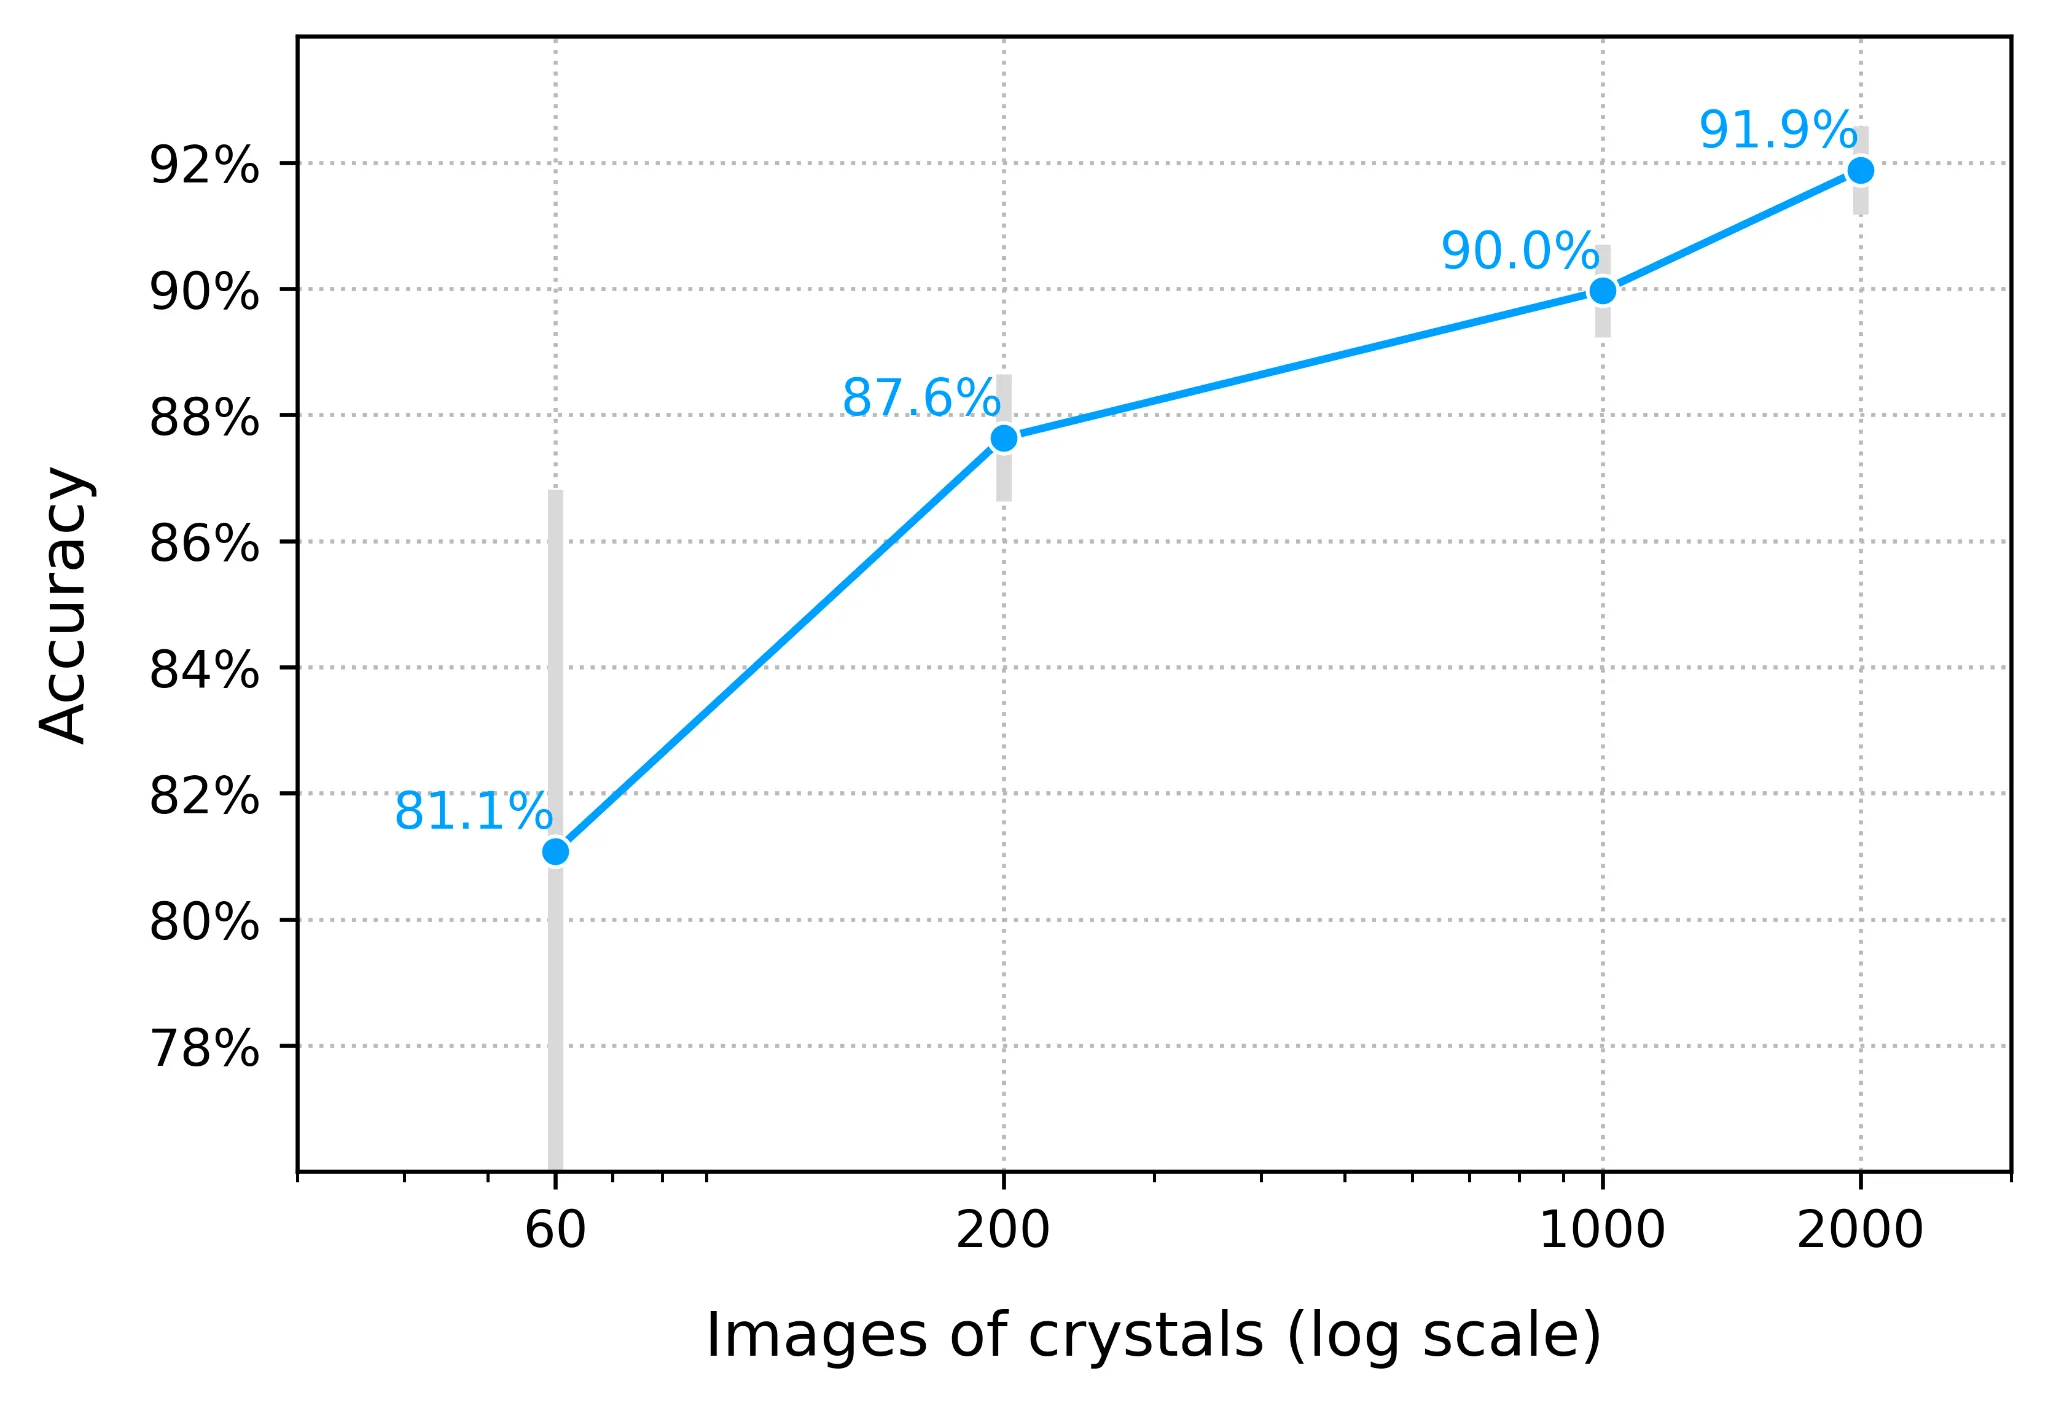 A line graph demonstrating the increase in accuracy of a crystal detection algorithm as the number of training images increases. The graph uses a logarithmic scale for the number of images, showing an upward trend from 81.1% accuracy with 60 images to 91.9% with 2000 images, passing through intermediate accuracies at various dataset sizes